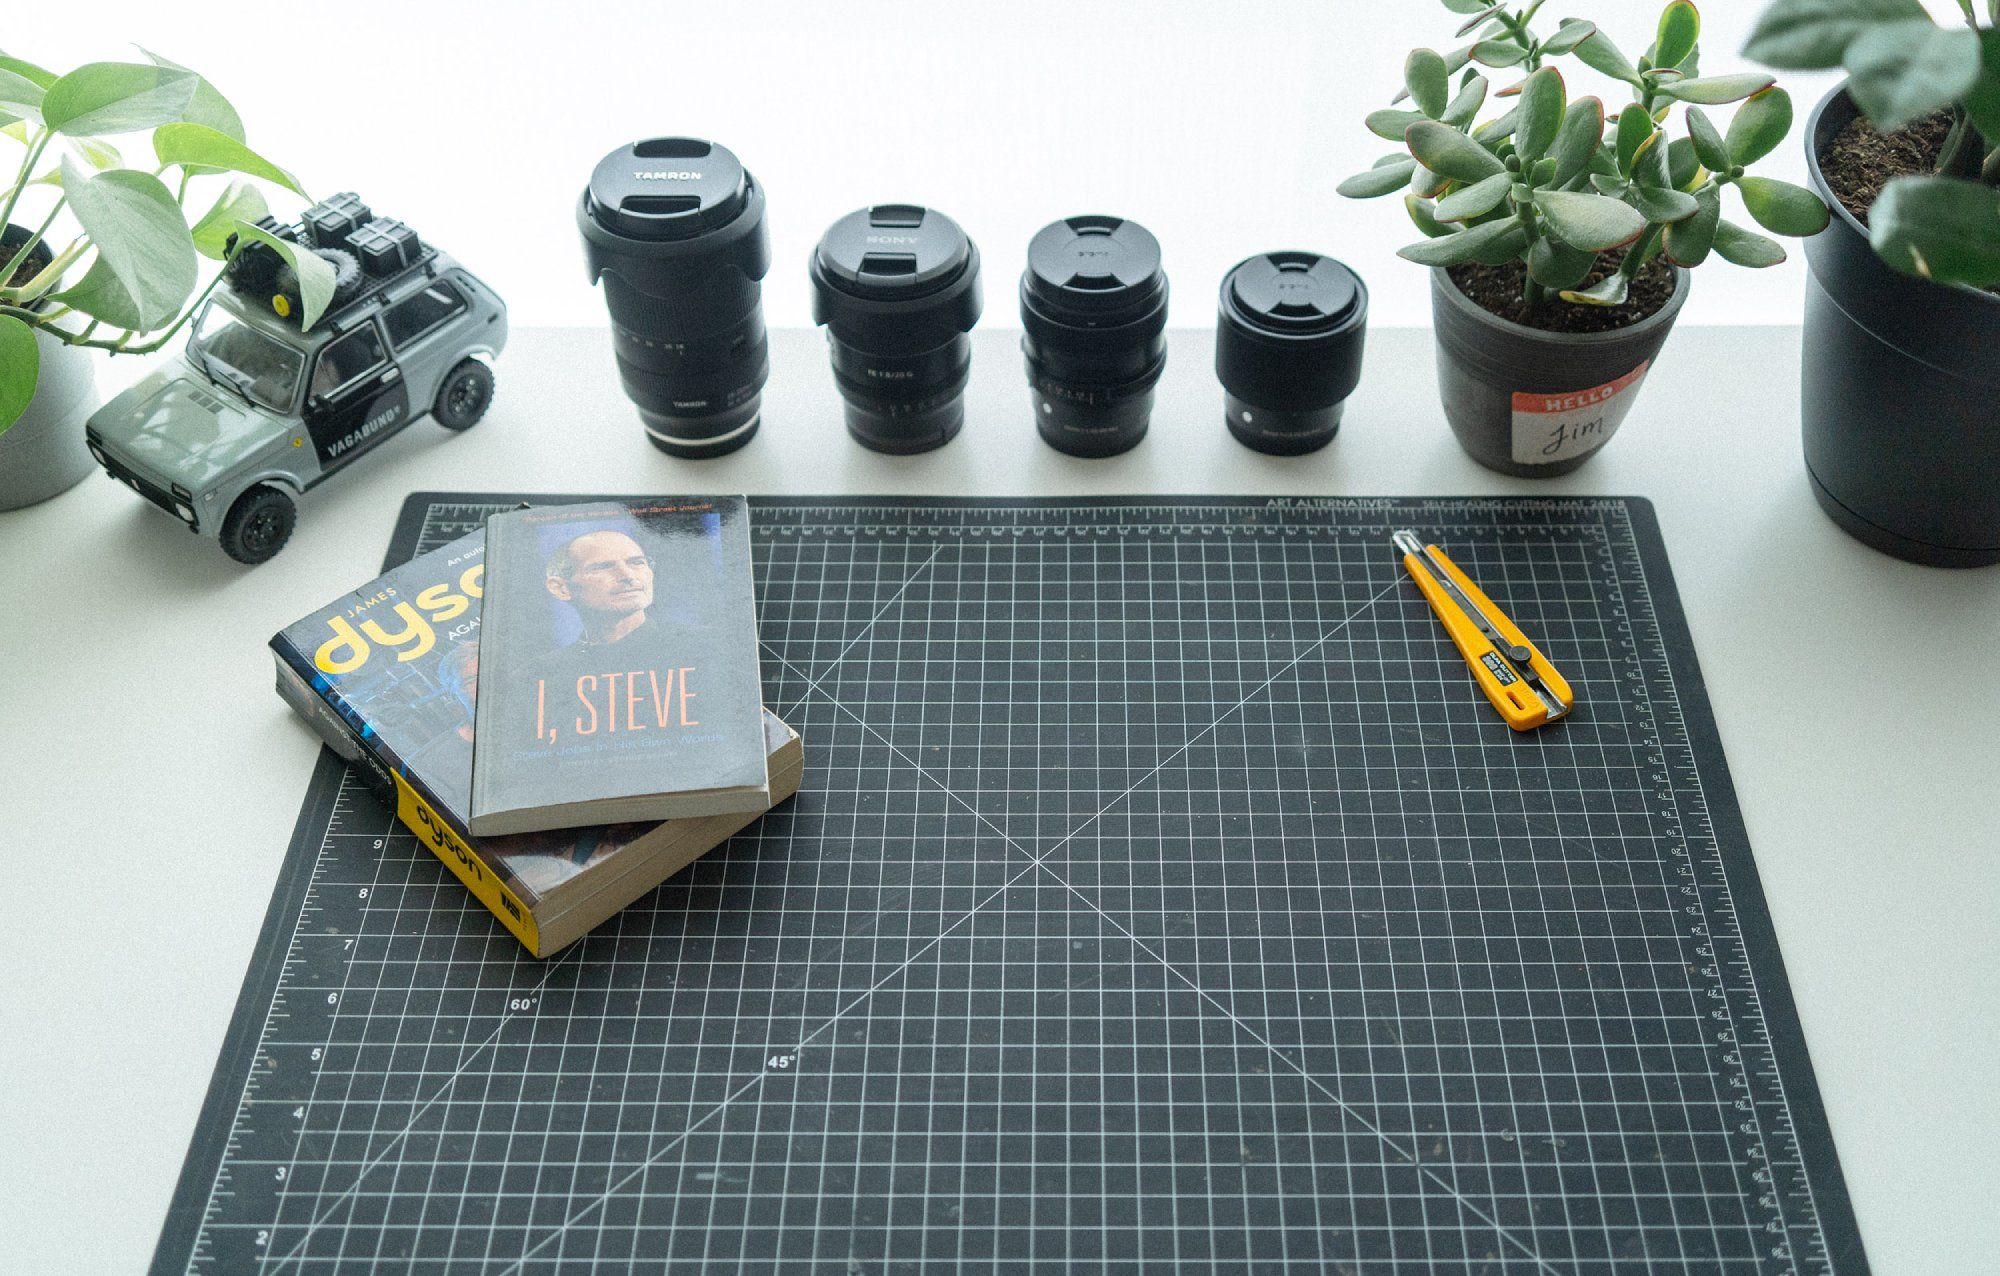 Two books and a ratchet-lock utility knife lying on a cutting mat next to 4 camera lenses, a model toy car, and some plants